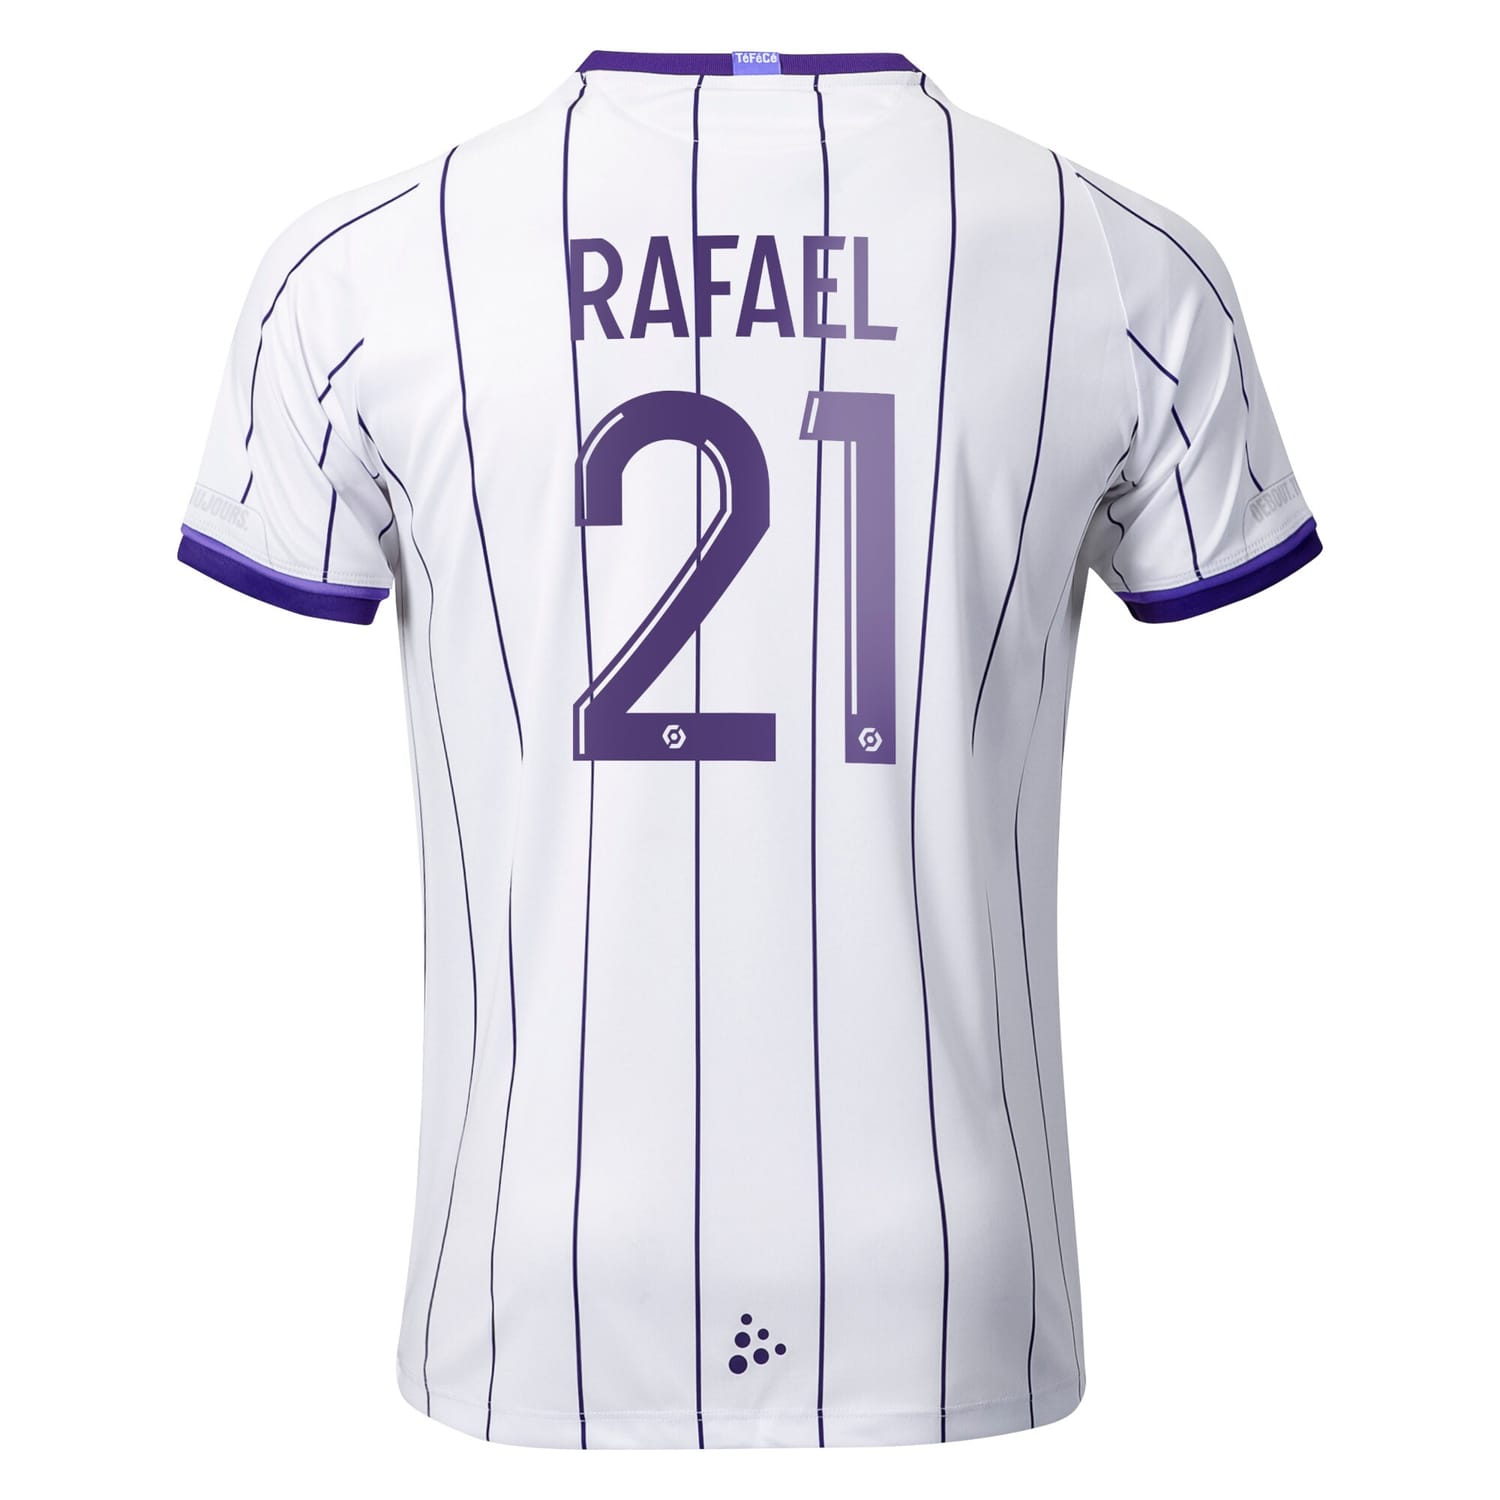 Ligue 1 Toulouse Home Jersey Shirt 2022-23 player Rafael Ratao 21 printing for Women